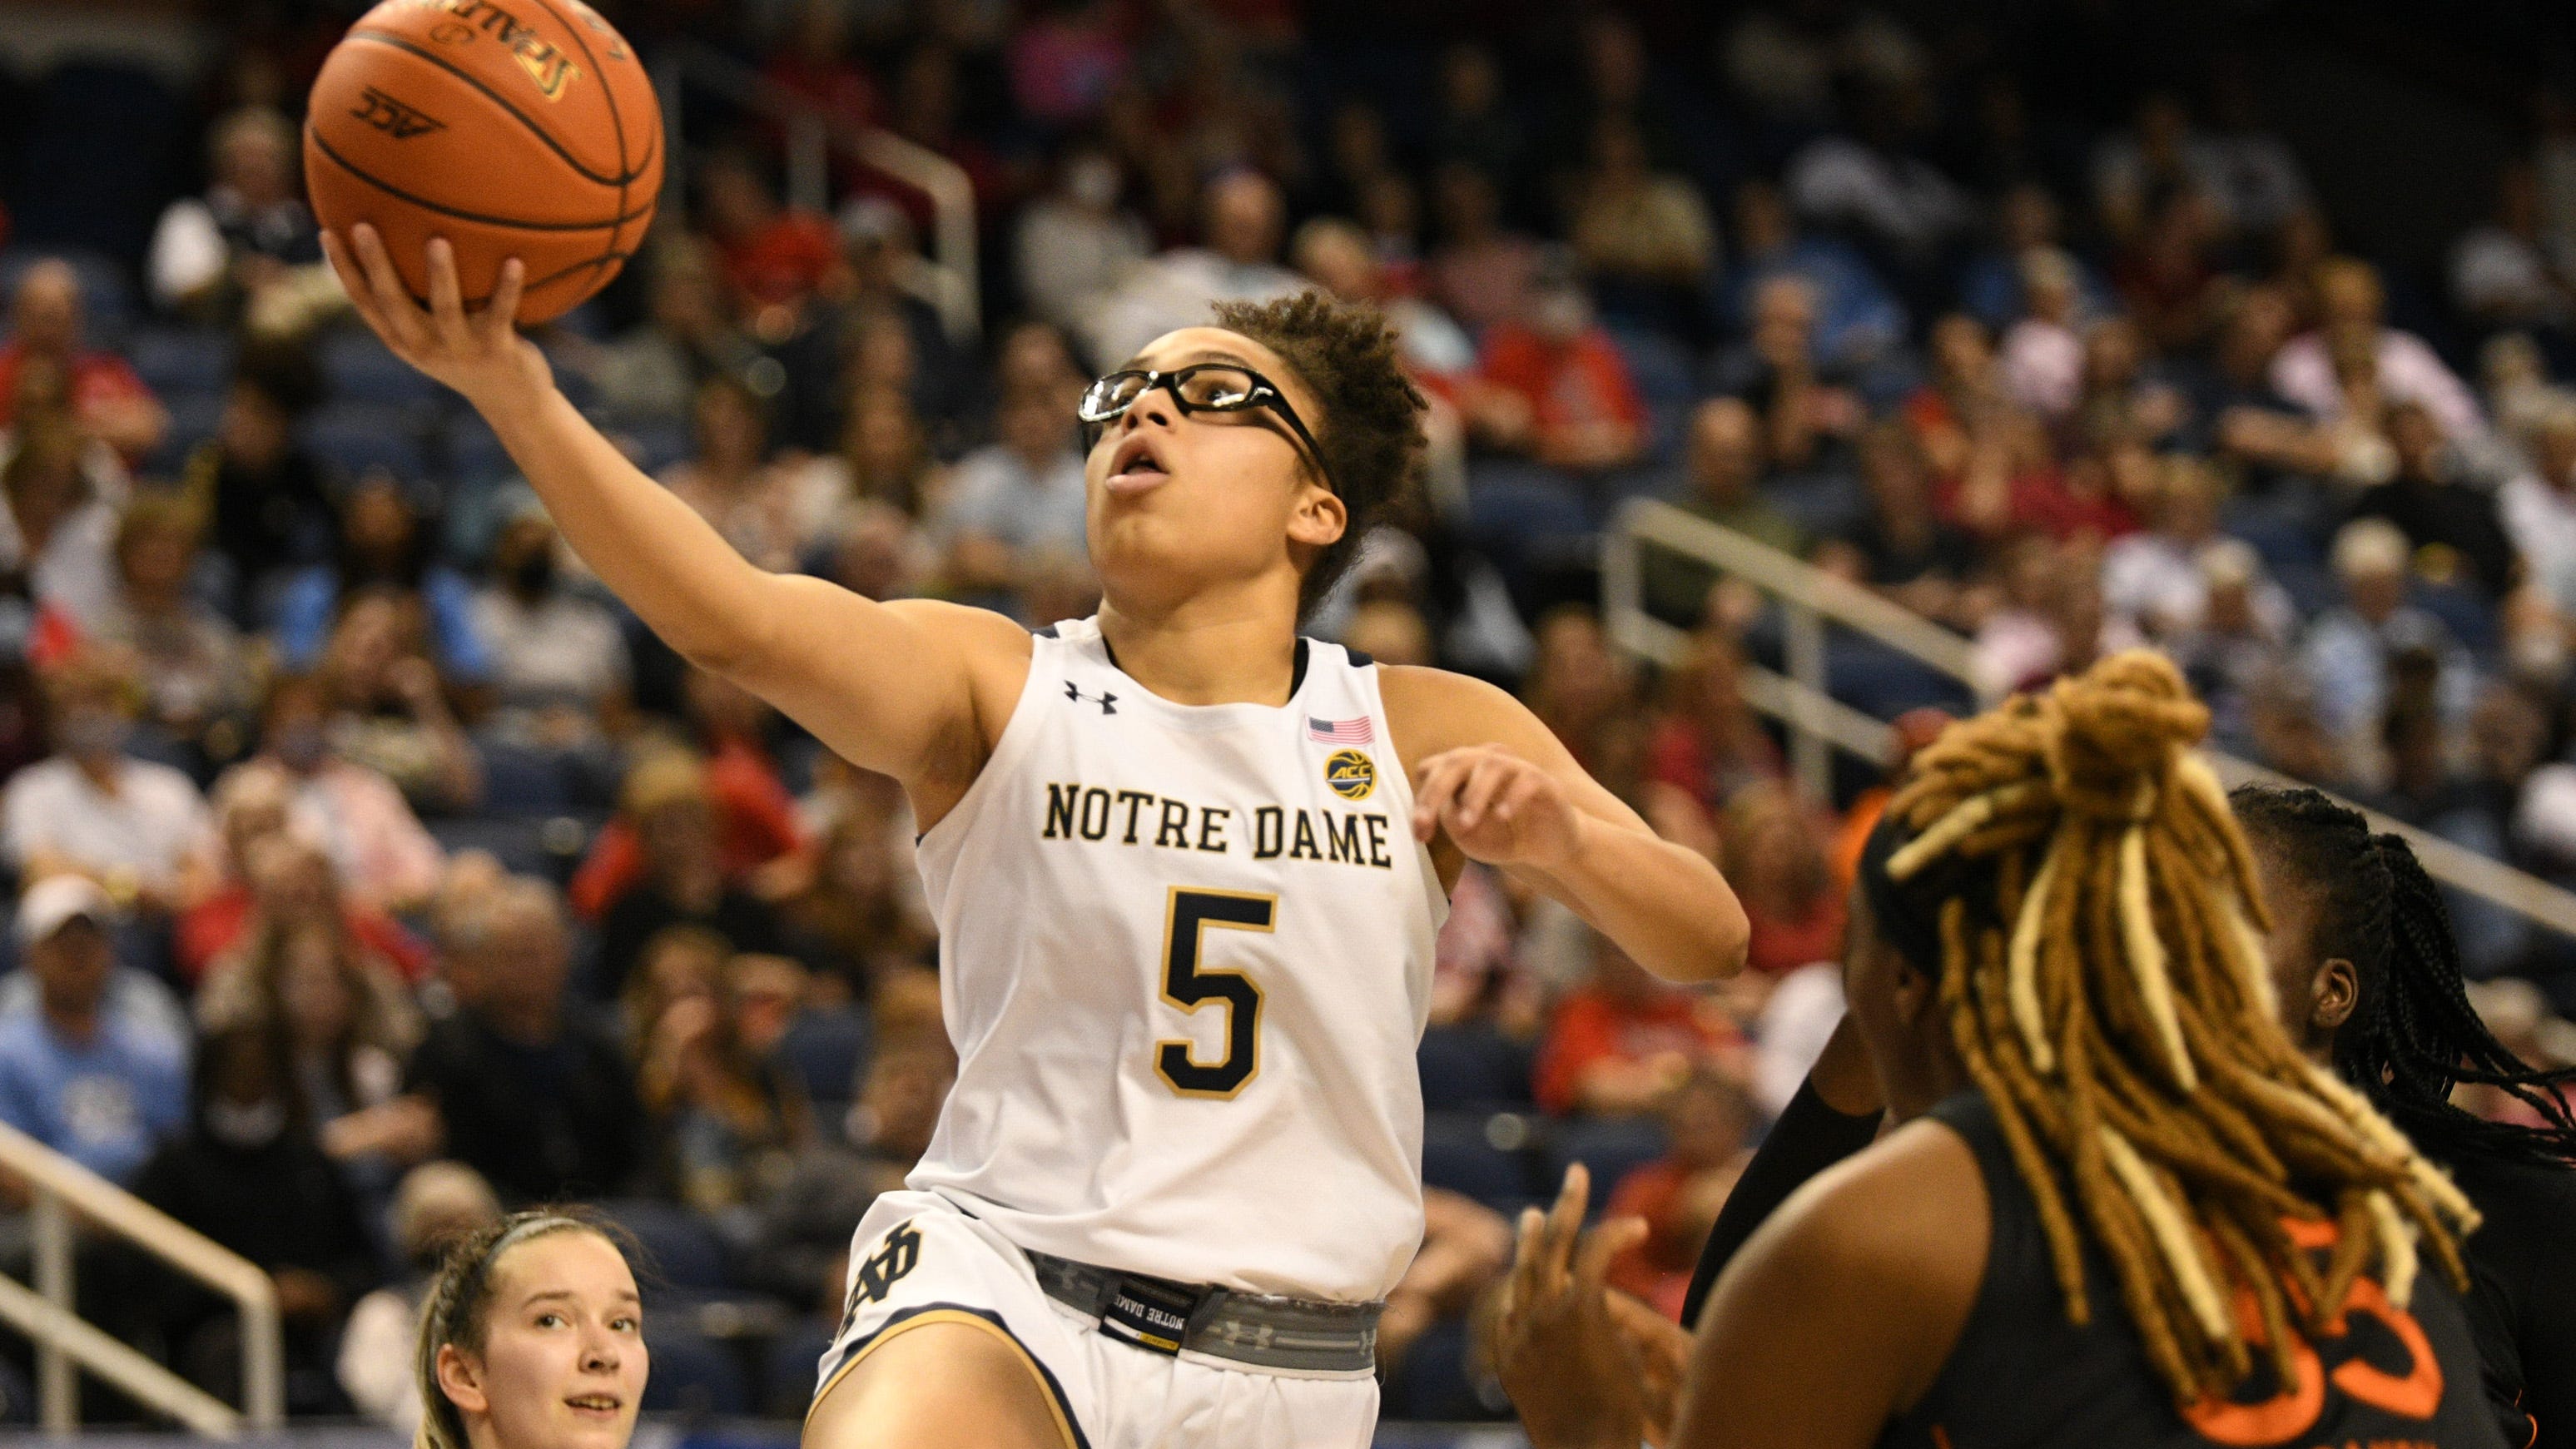 Lima Groenteboer Bende Why Olivia Miles is Notre Dame's next big star, goggles and all